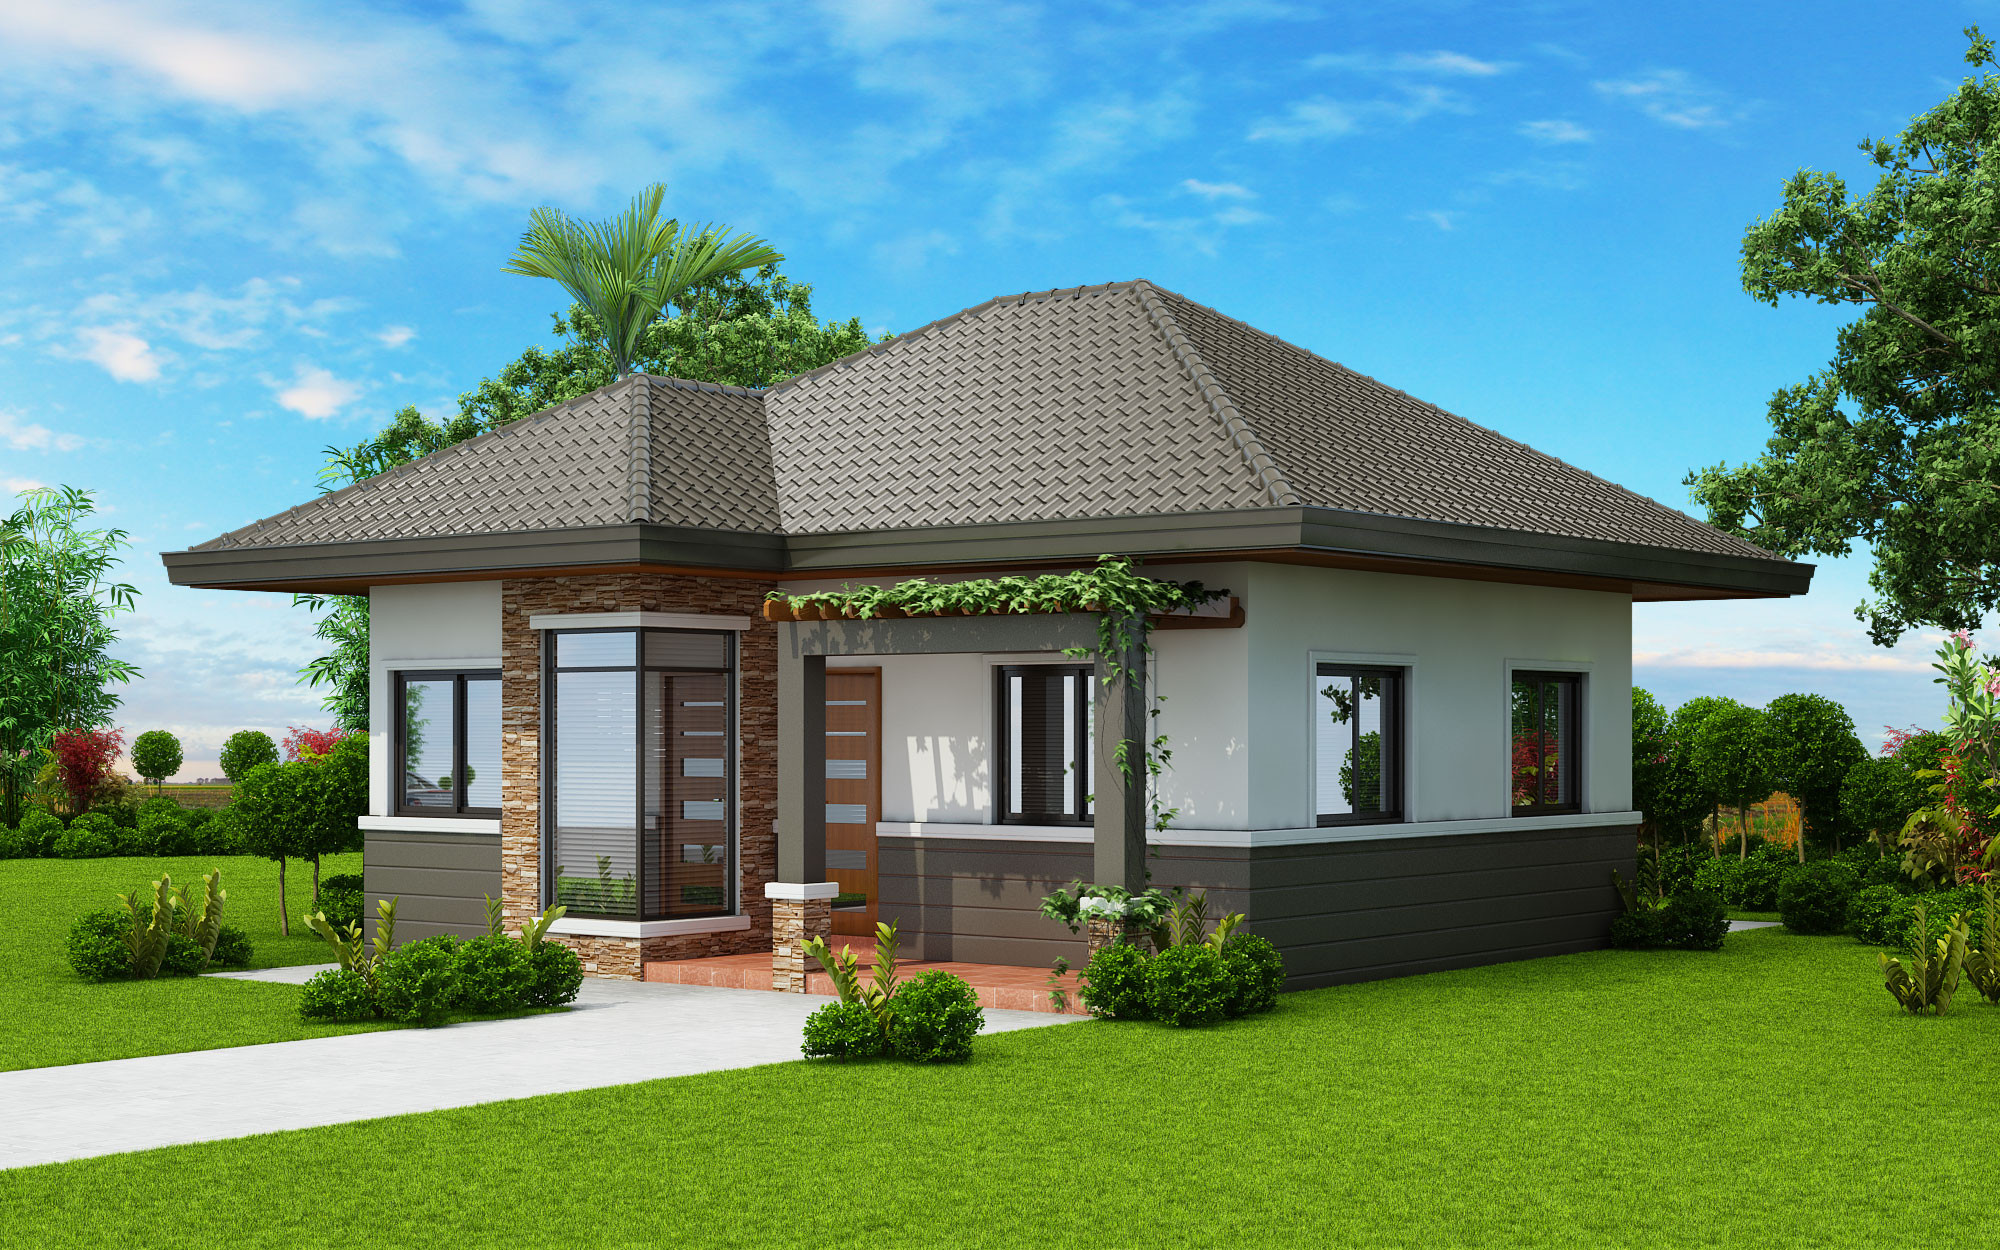 Small 2 Bedroom House Plans
 Two Bedroom Small House Plan Cool House Concepts